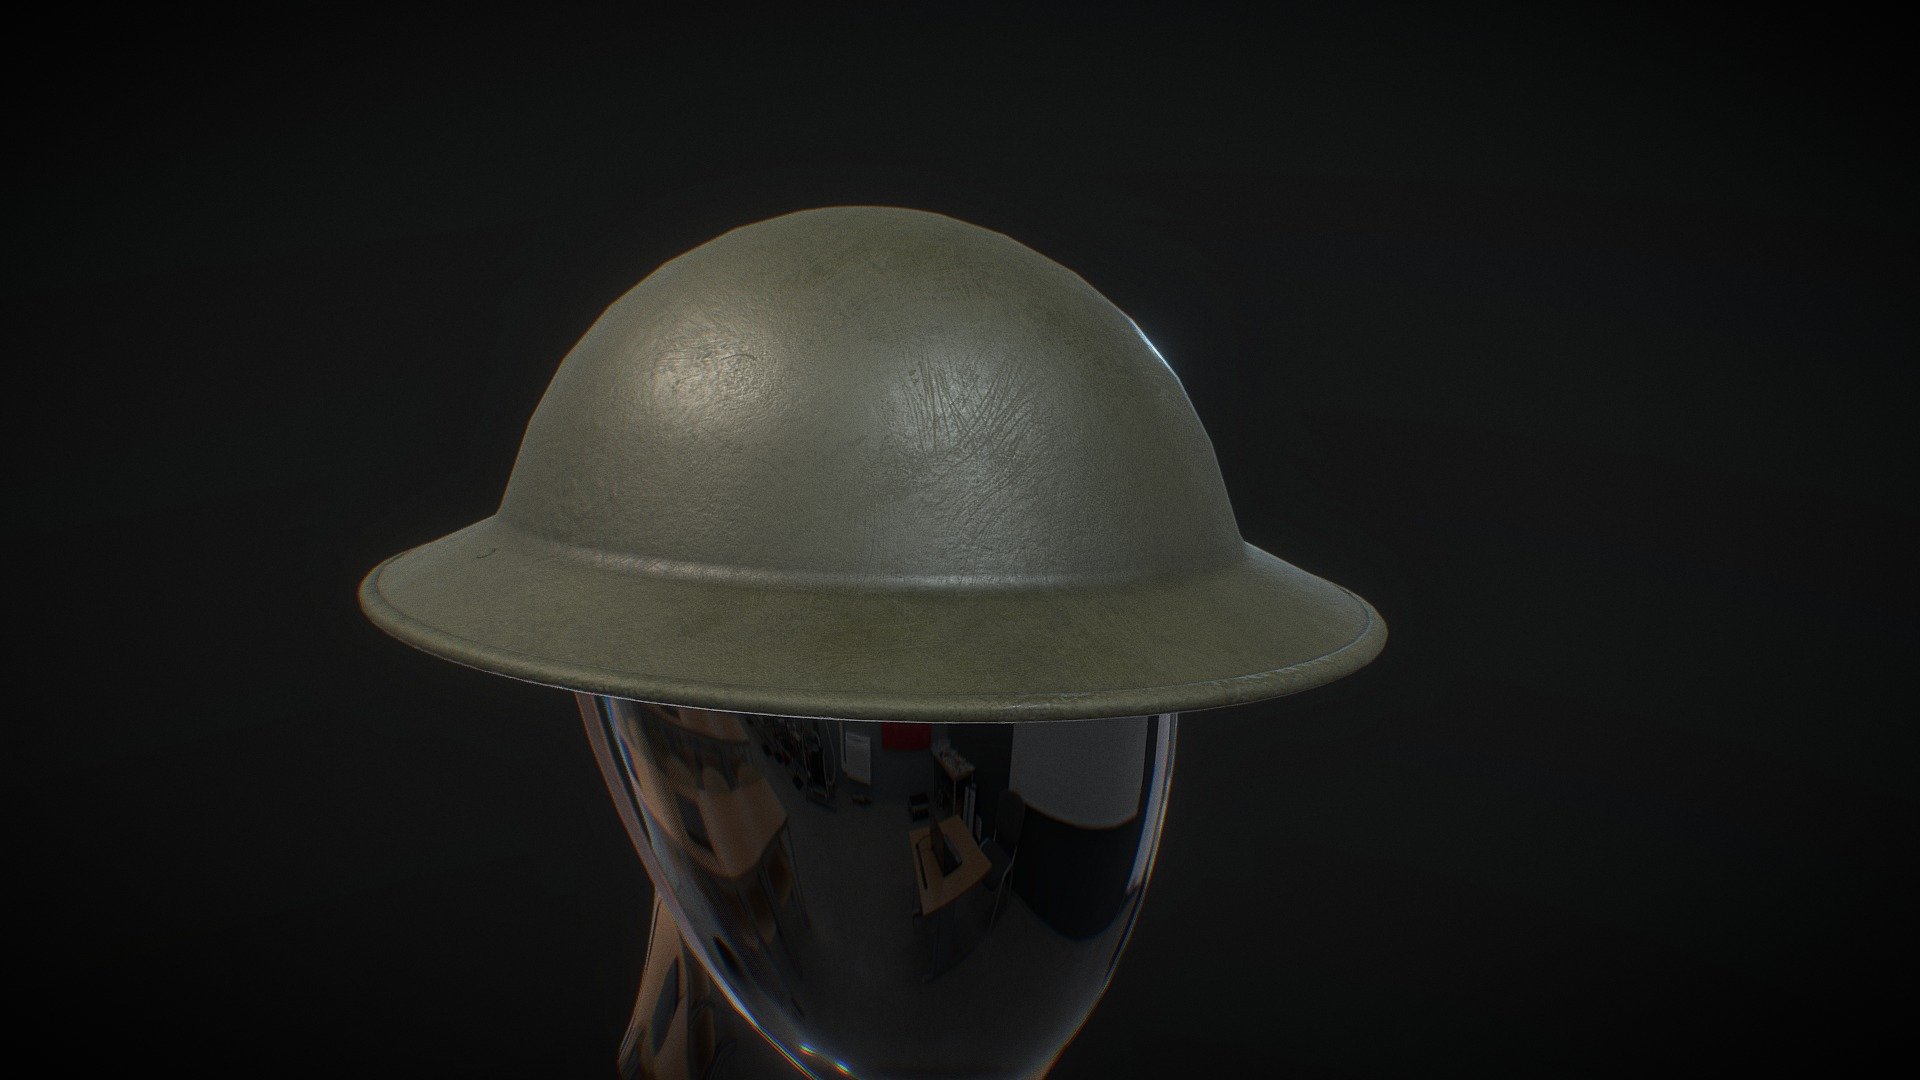 The Dirty version - https://skfb.ly/oxzsN

Cover Version - https://skfb.ly/oxCsQ

The Brodie helmet is a steel combat helmet designed and patented in London in 1915 by John Leopold Brodie. A modified form of it became the Helmet, Steel, Mark I in Britain and the M1917 Helmet in the US. Colloquially, it was called the shrapnel helmet, battle bowler, Tommy helmet, tin hat, and in the United States the doughboy helmet. It was also known as the dishpan hat, tin pan hat, washbasin, battle bowler (when worn by officers), and Kelly helmet. The German Army called it the Salatschüssel (salad bowl).[1] The term Brodie is often misused. It is correctly applied only to the original 1915 Brodie's Steel Helmet, War Office Pattern.
https://en.wikipedia.org/wiki/Brodie_helmet - "Brodie" MK 1 - WWI British Helmet - Buy Royalty Free 3D model by Davicolt 3d model